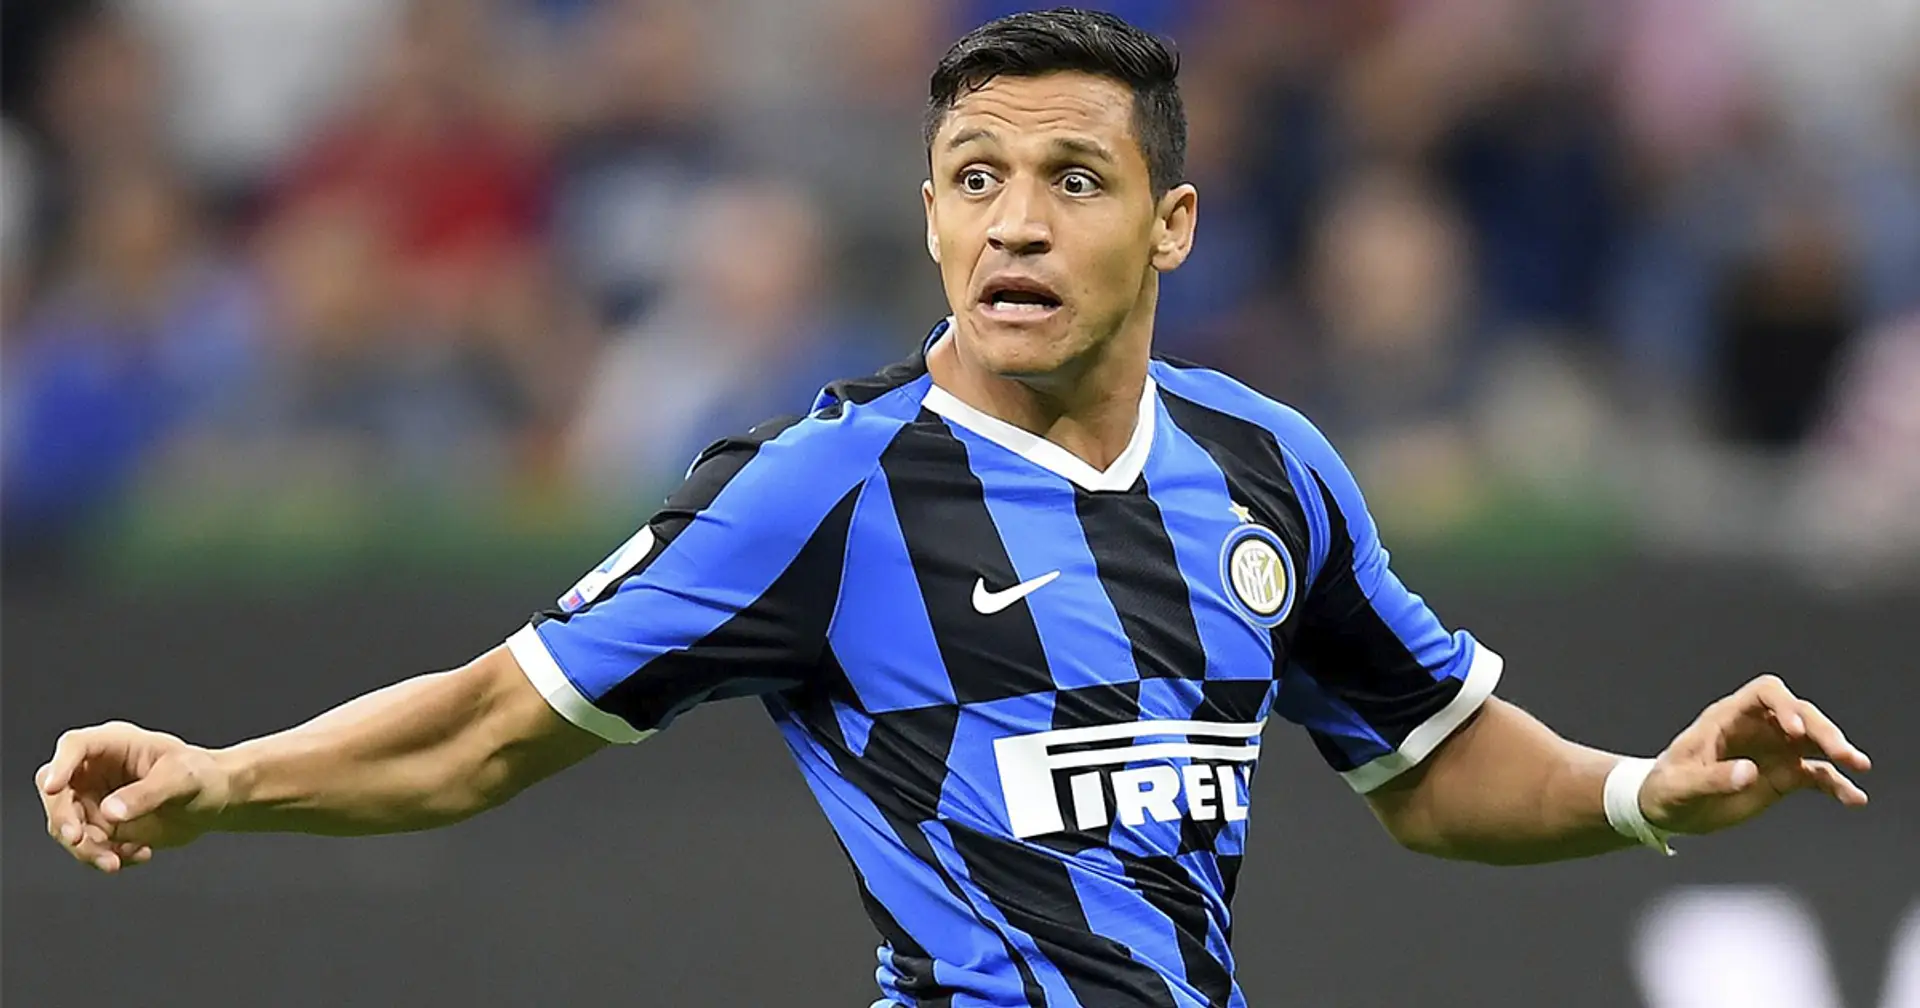 United 'asking for at least €20m' for Alexis; Inter insist on lower price